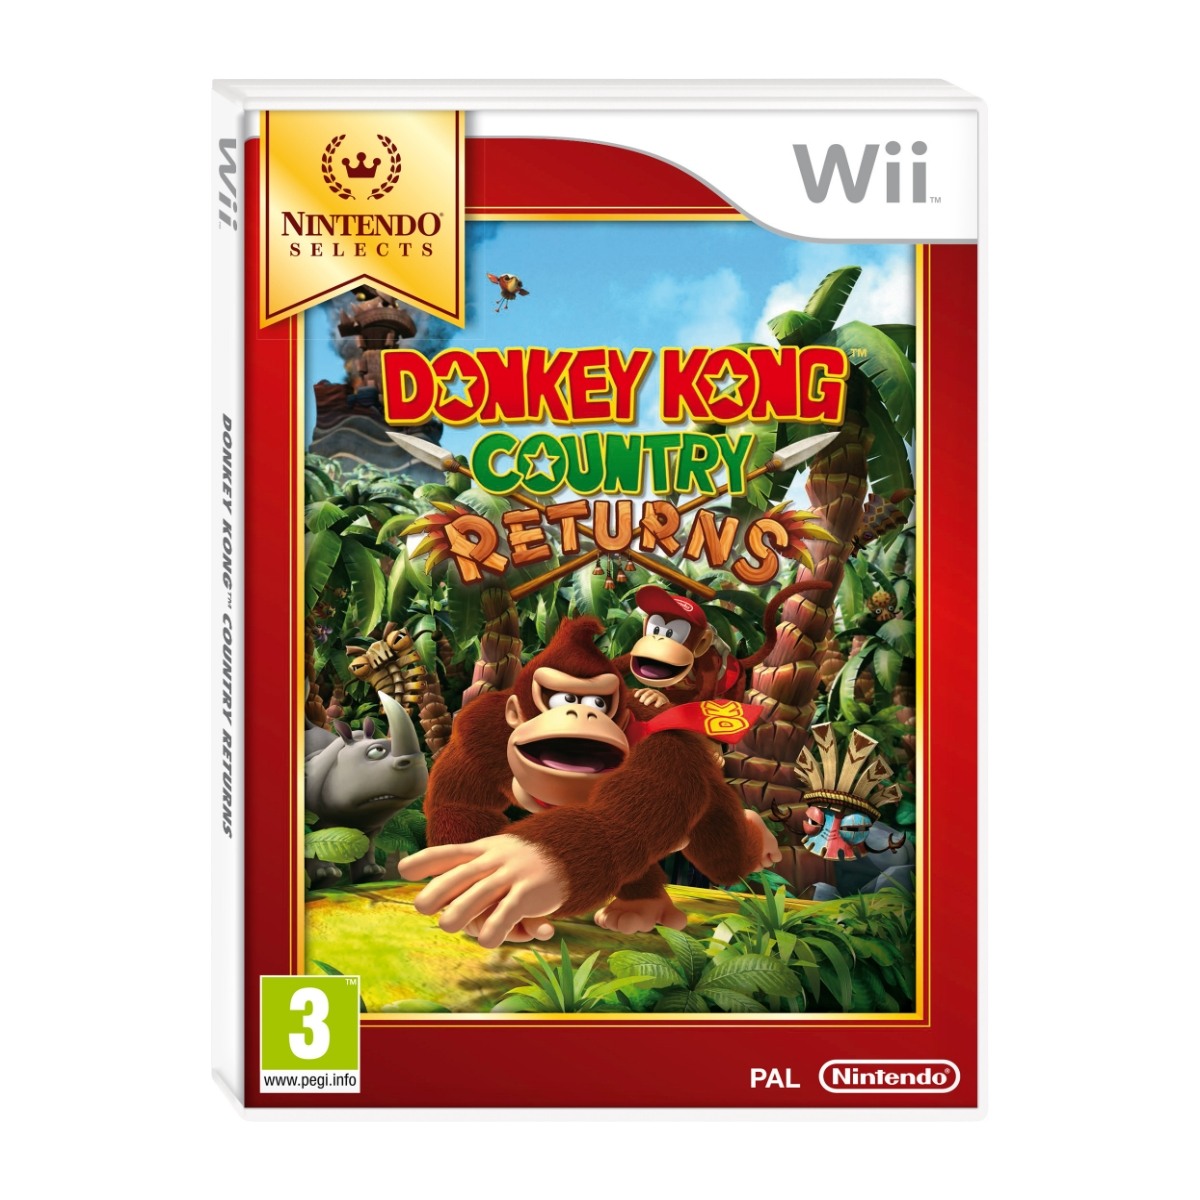 download donkey kong country returns wii torrent